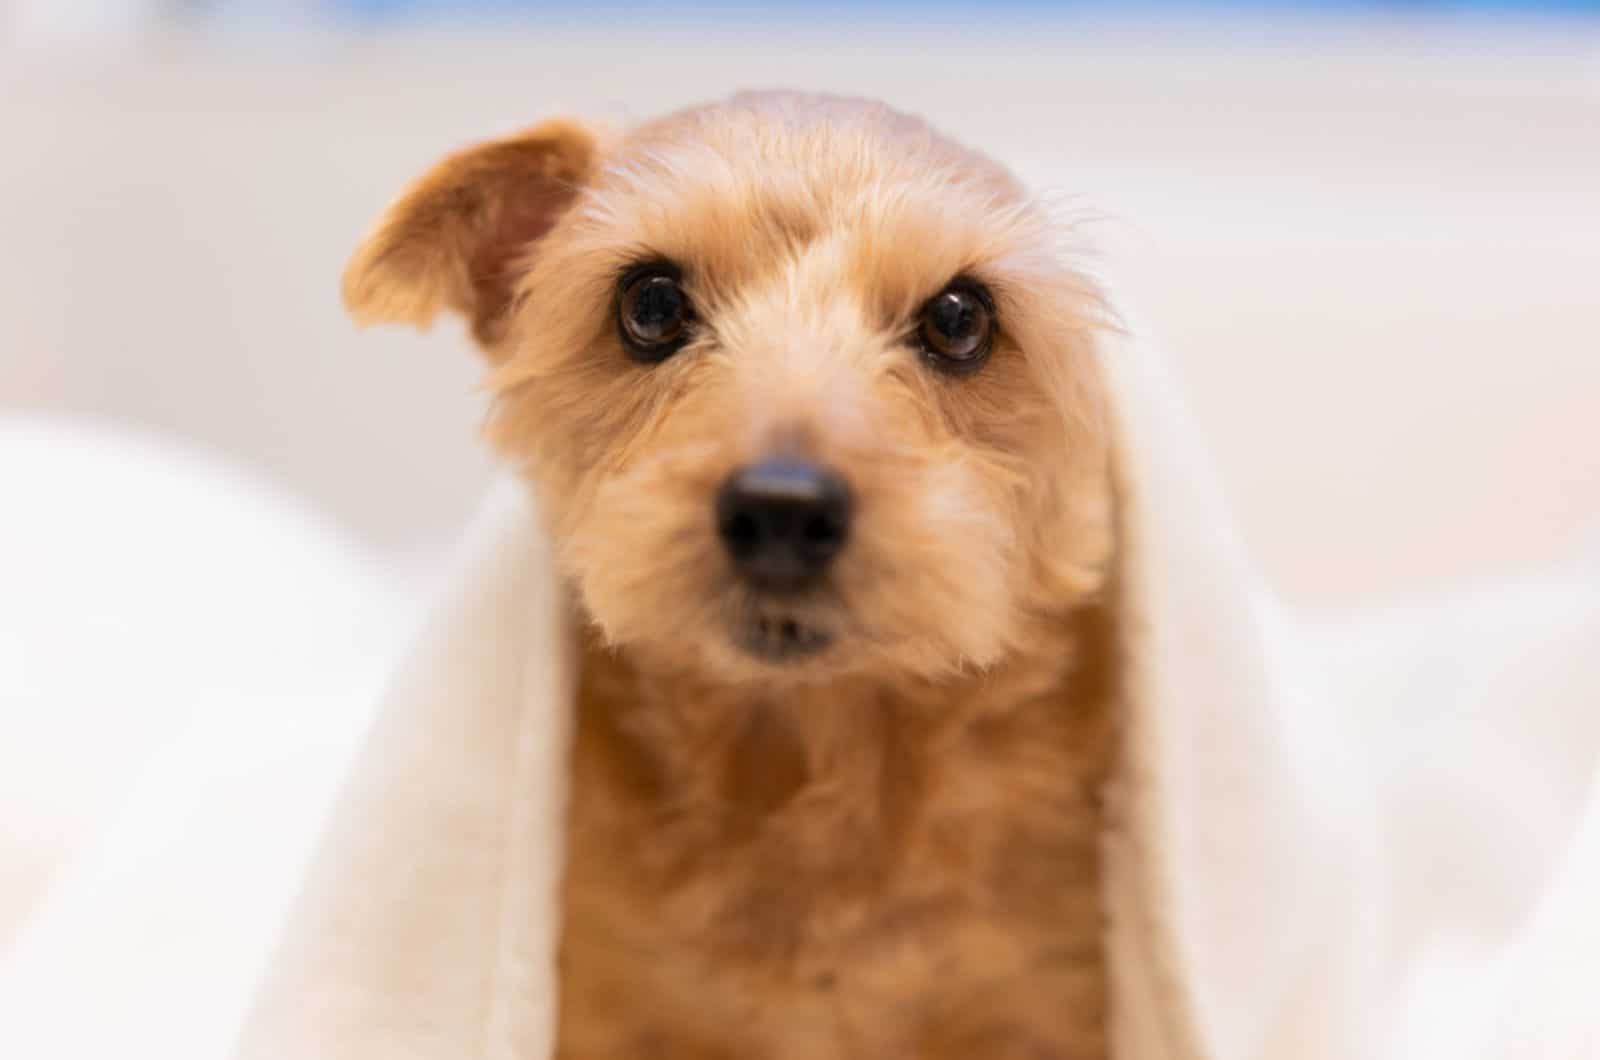 norfolk terrier in the bed covered with a blanket